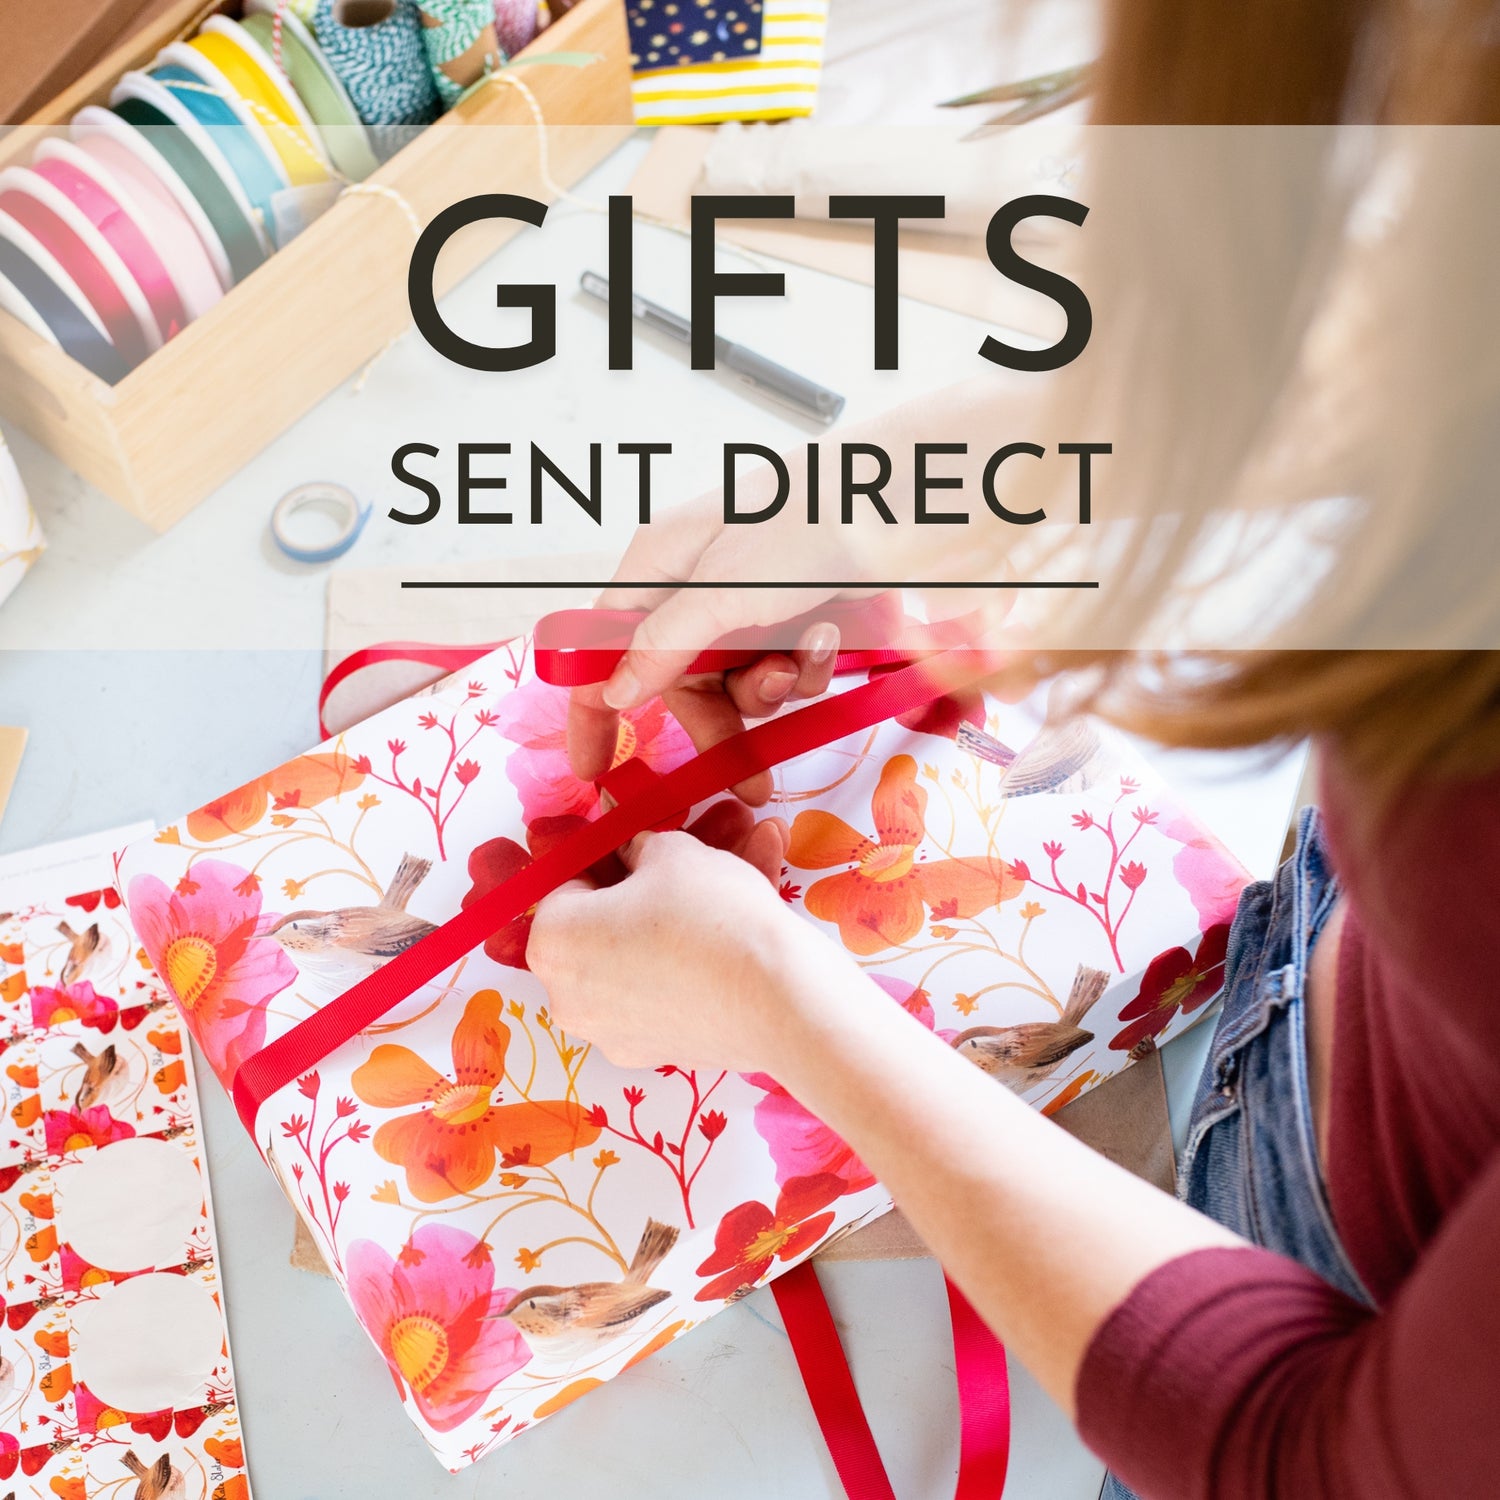 Gift Service - Gifts Sent Direct